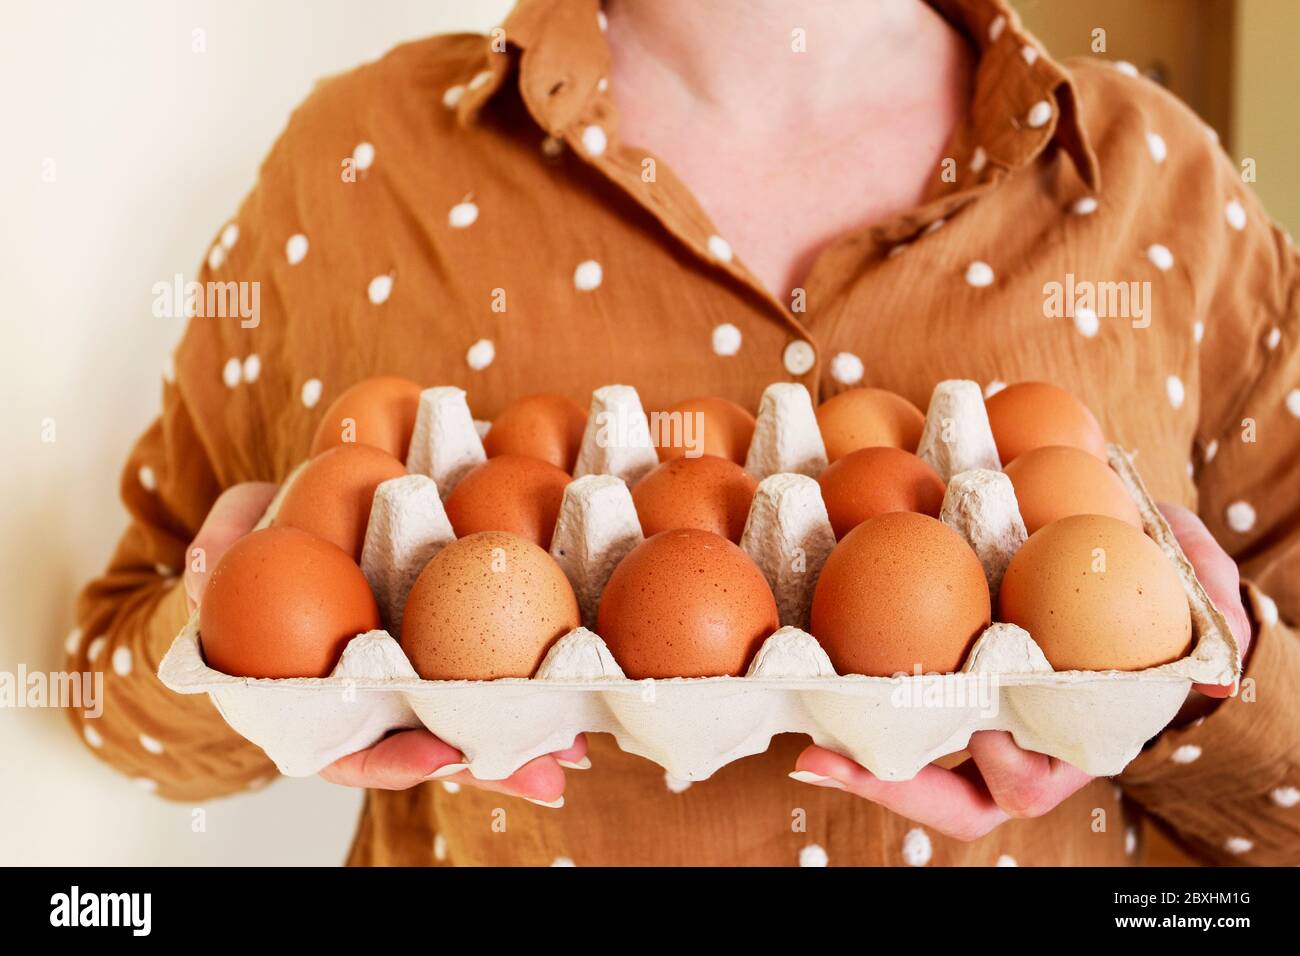 Woman is holding a paper box with eggs. Cooking time Stock Photo